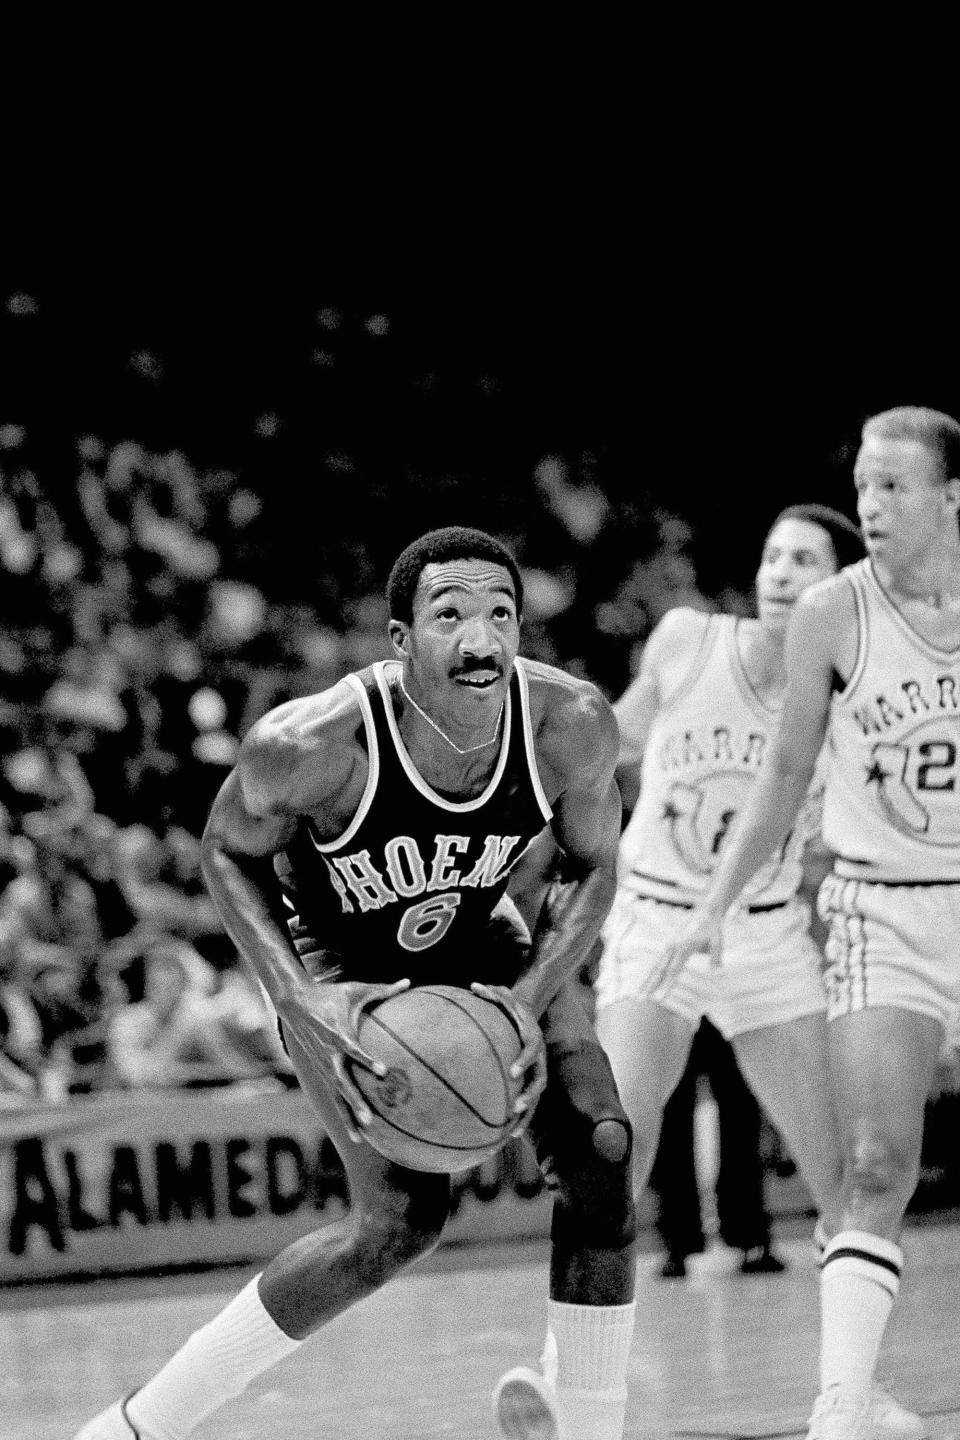 FILE - Phoenix Suns' Walter Davis, left, controls the ball against the Golden State Warriors in the first half of their NBA game in Oakland, Calif., Oct. 18, 1978. Davis, a five-time NBA All-Star who had his number retired by the Phoenix Suns, has died. He was 69. Davis was star in college for North Carolina where he played for the late Dean Smith. The school's release said Walter Davis died Thursday morning, Nov. 2, 2023, of natural causes while visiting family in Charlotte, North Carolina.(AP Photo/File)